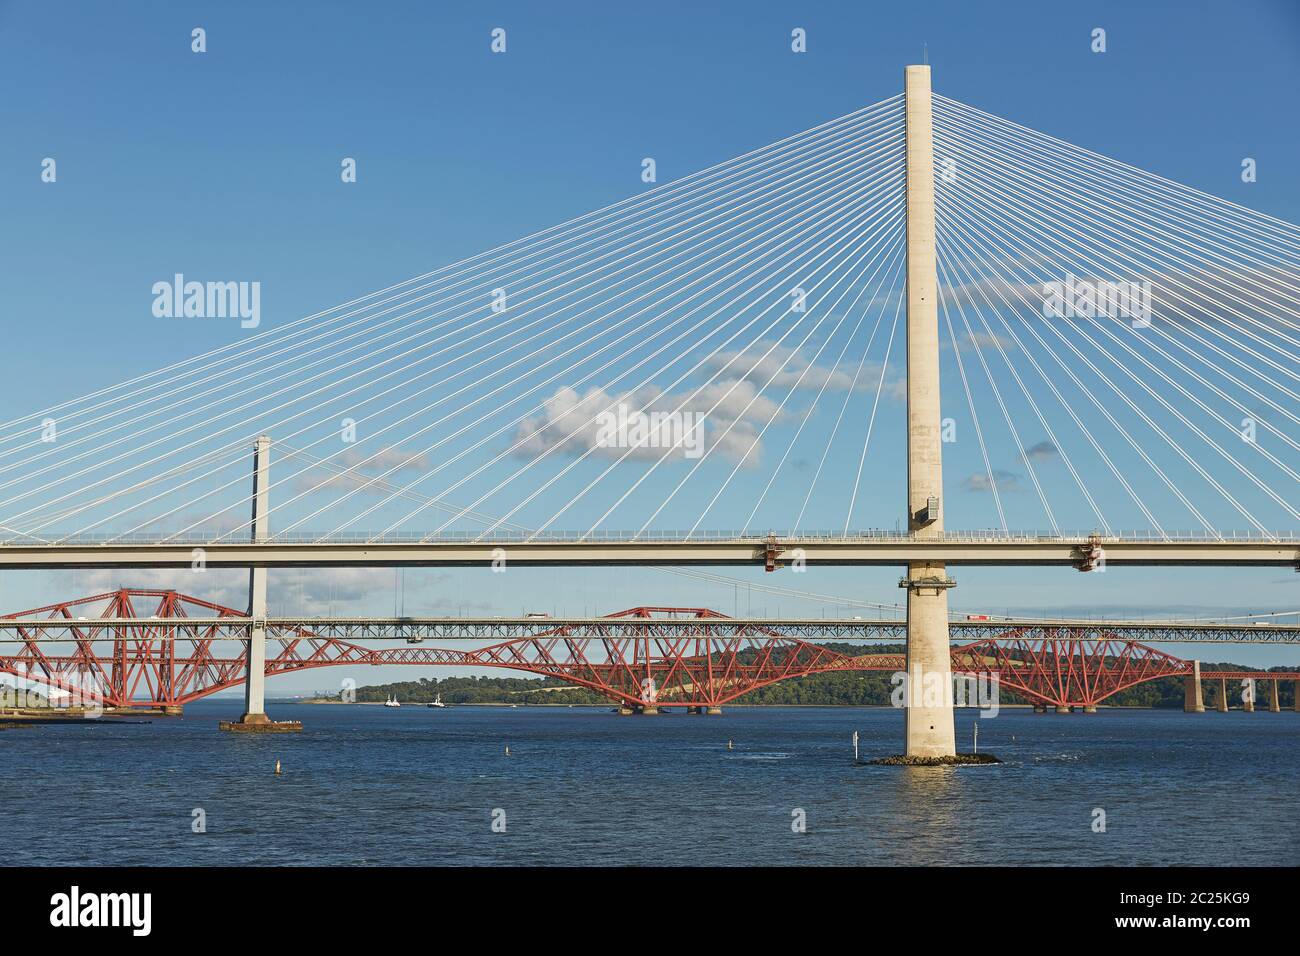 The new Queensferry Crossing bridge over the Firth of Forth with the older Forth Road bridge and the Stock Photo